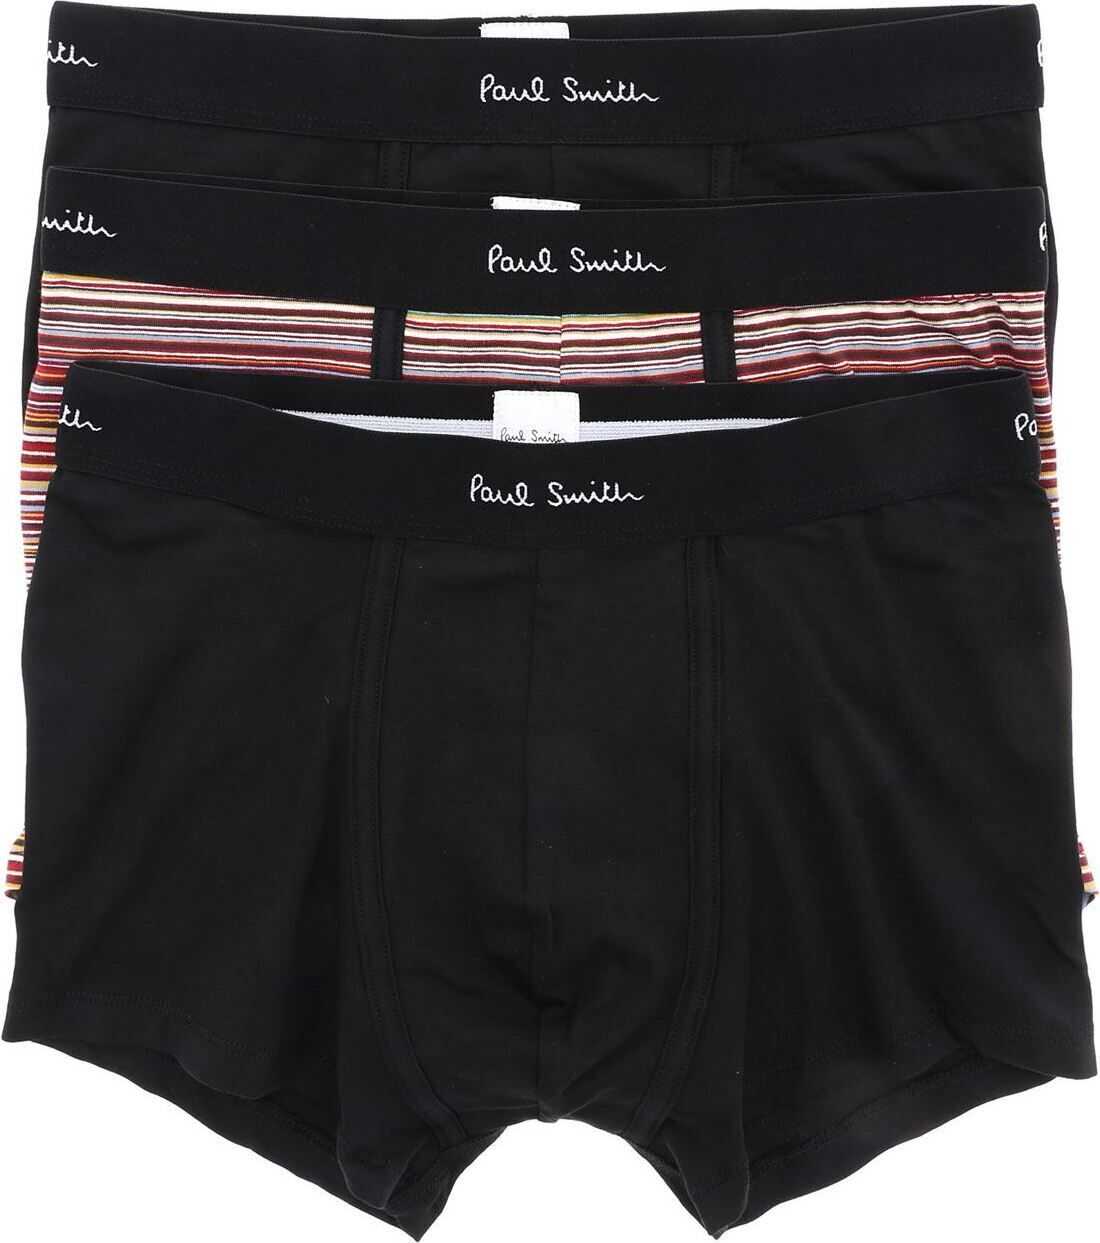 Paul Smith 3 Boxers Set With Branded Elastic* Black